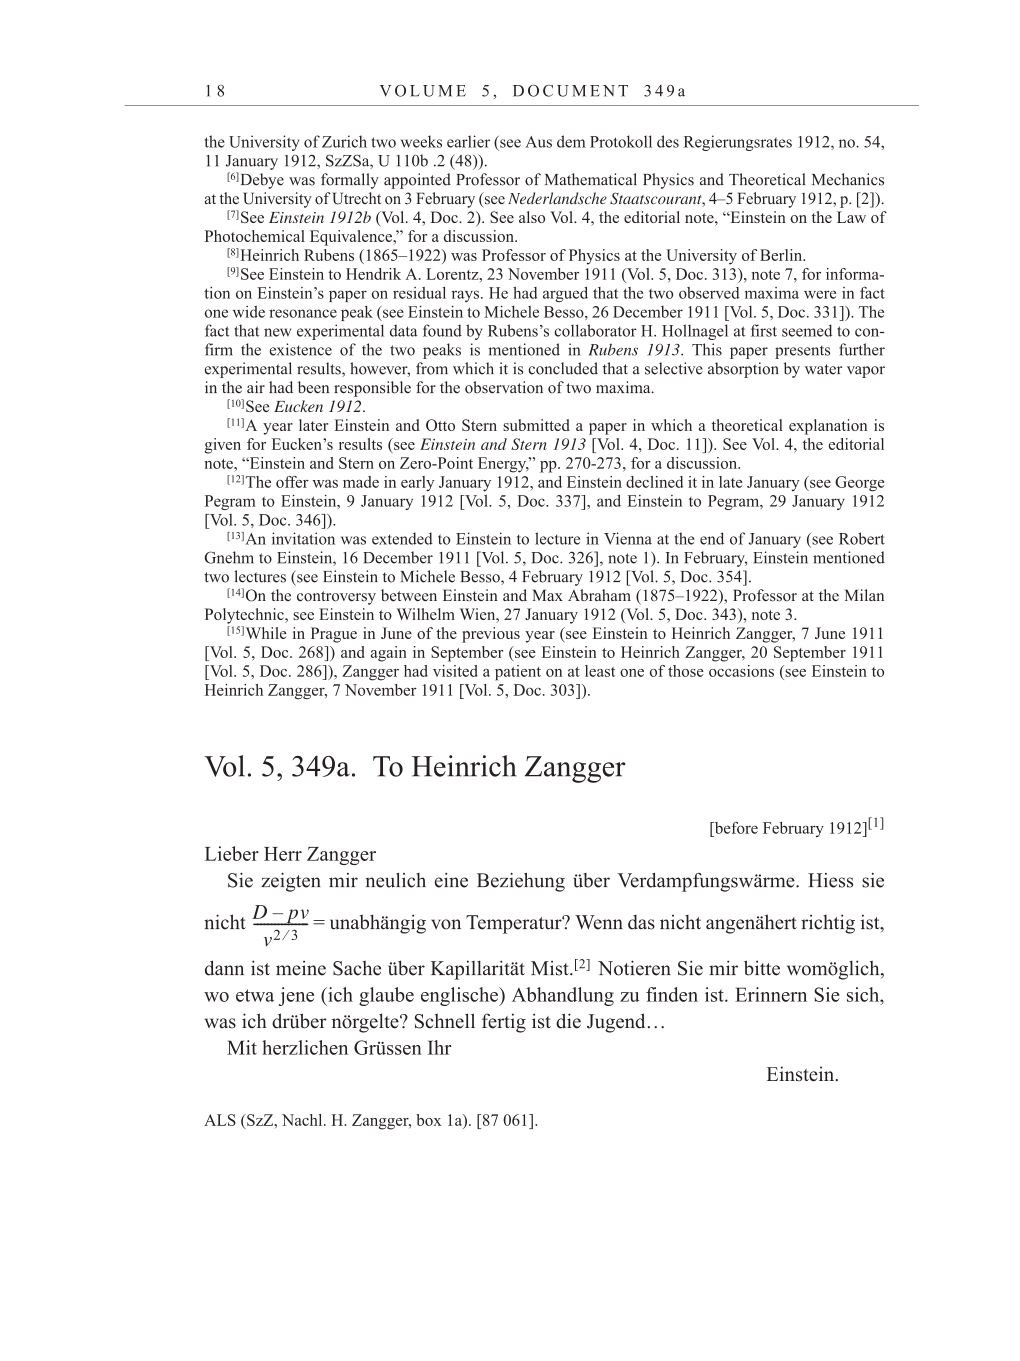 Volume 10: The Berlin Years: Correspondence May-December 1920 / Supplementary Correspondence 1909-1920 page 18